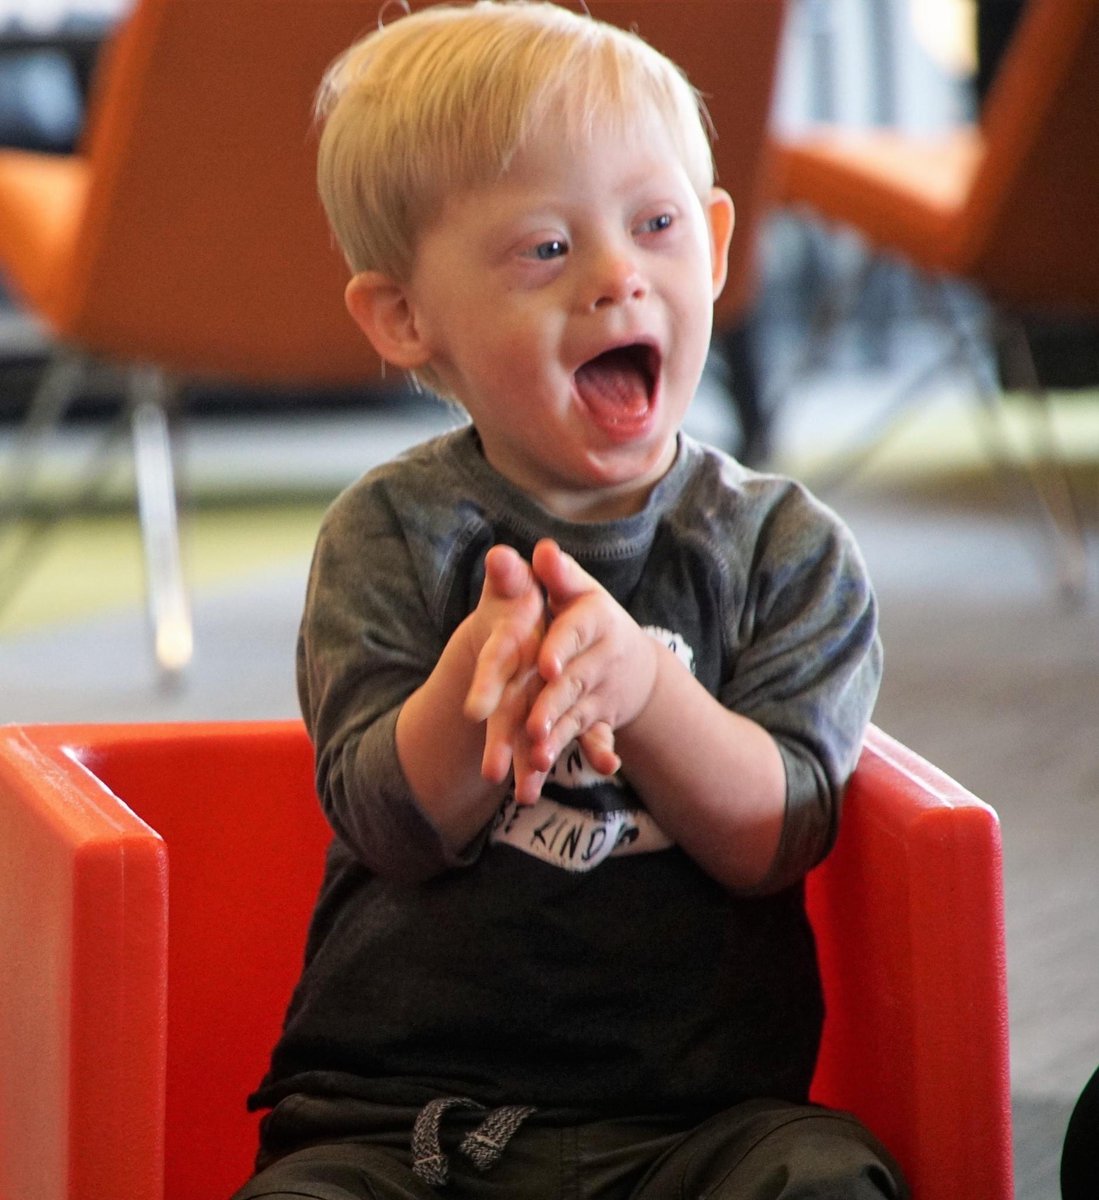 We celebrate our nephew Blakey Blake today and every single day. What a blessing this happy little guy has been to our family. #WorldDownSyndromeDay